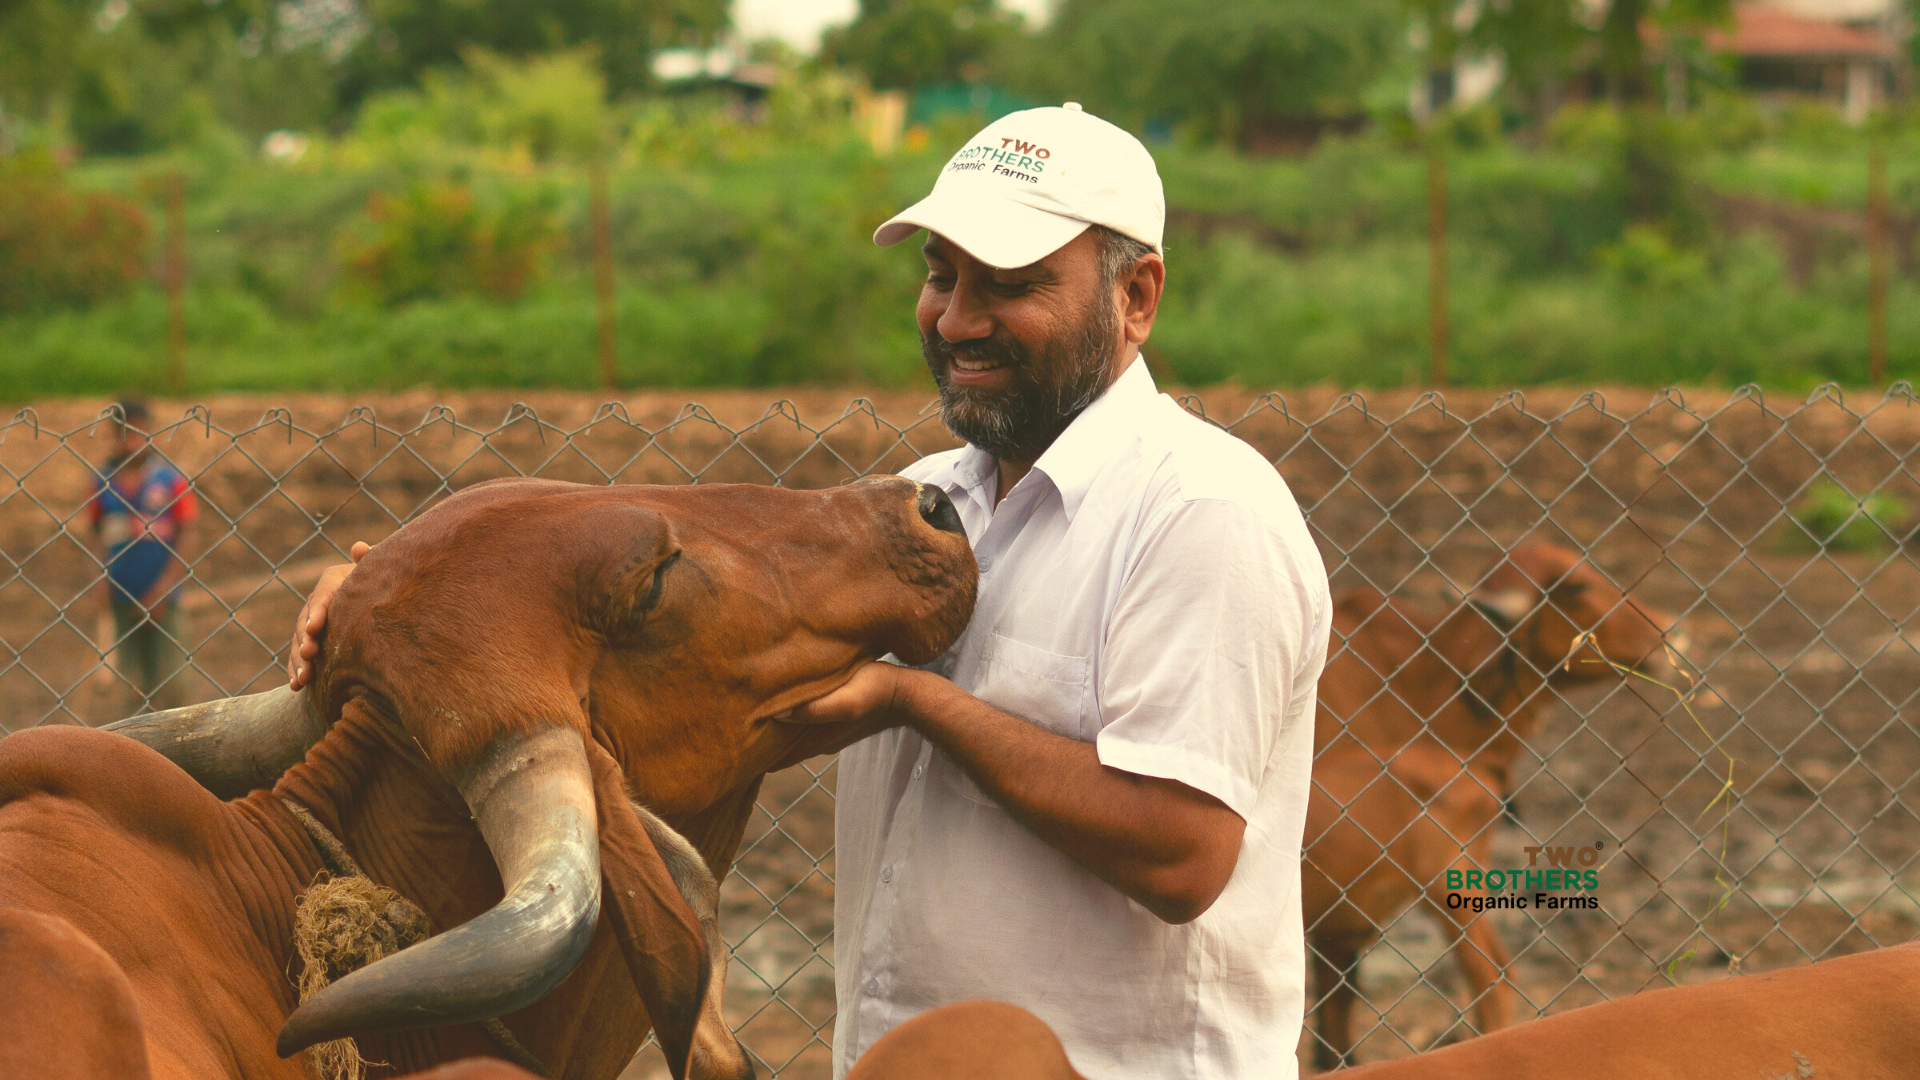 Satyajit Hange with Cow at Two Brothers Organic Farms